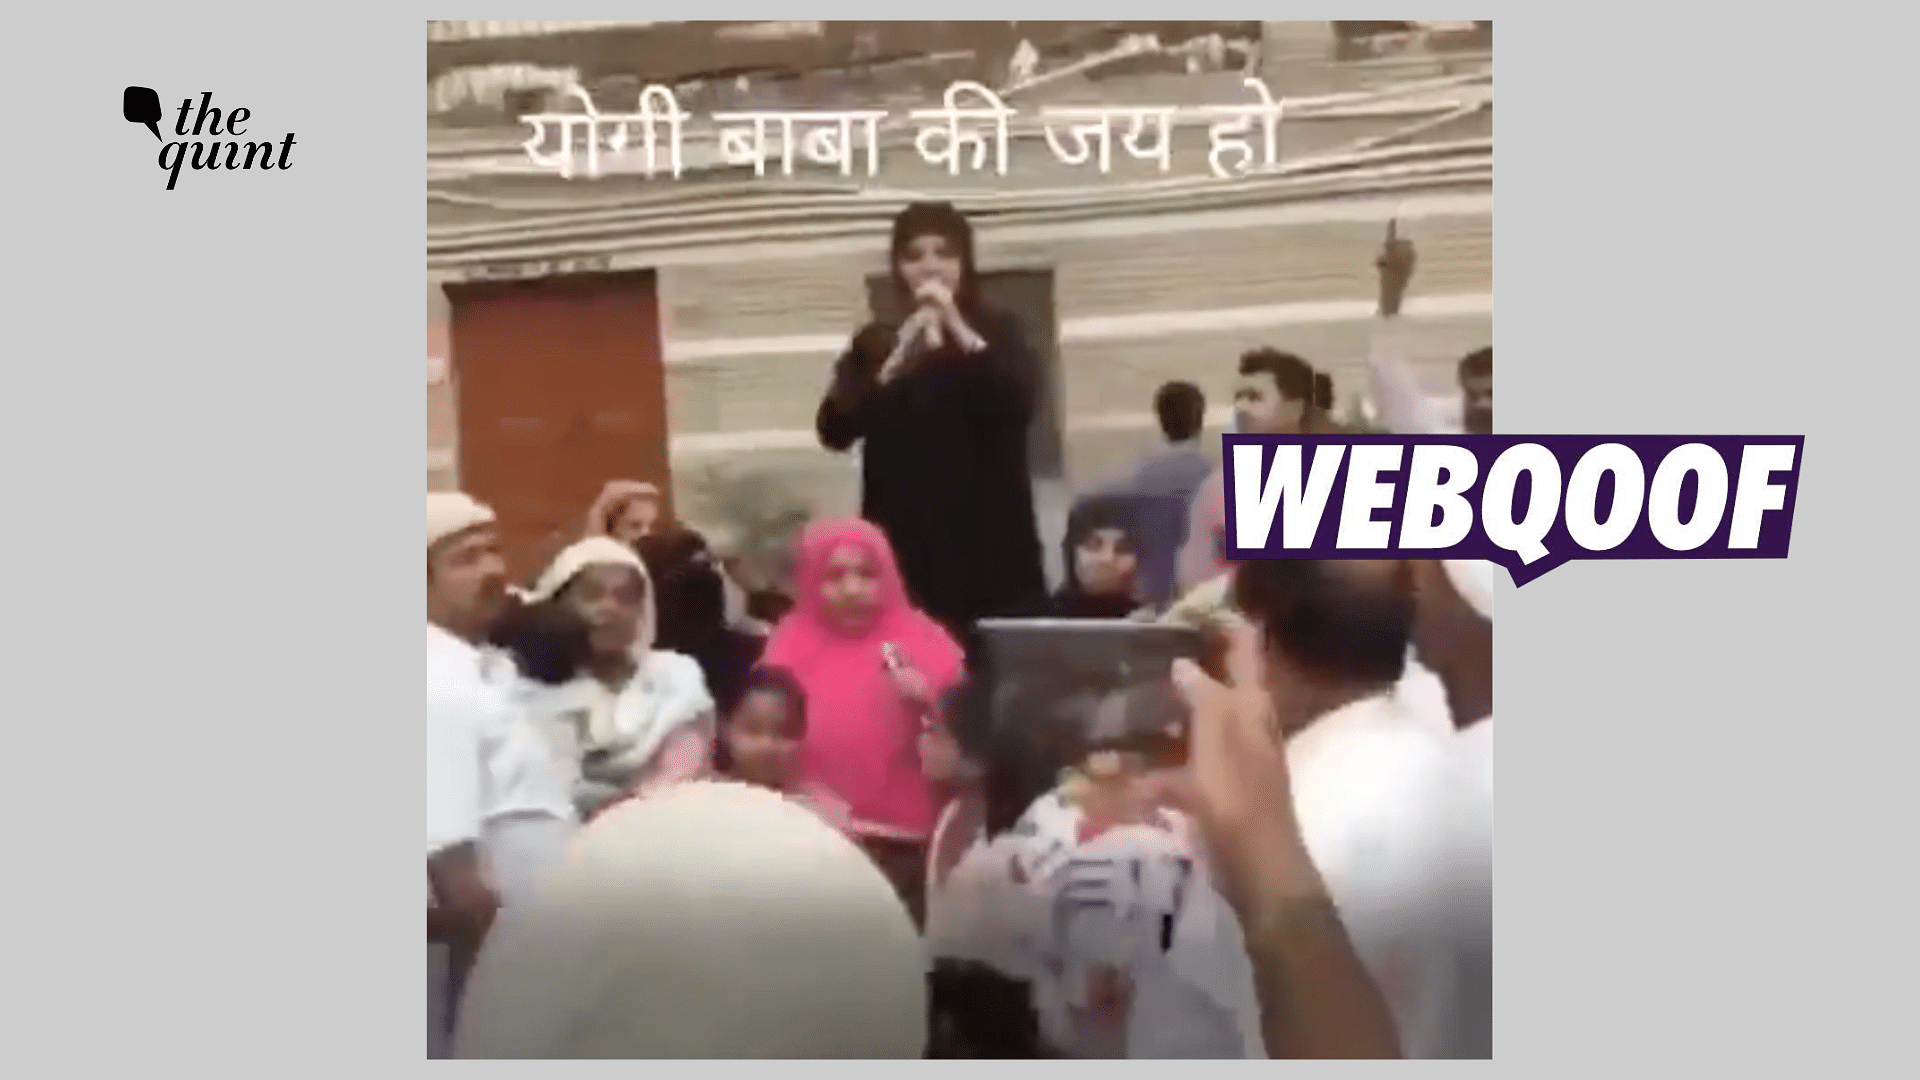 <div class="paragraphs"><p>The video shows a woman in a burqa raising slogans against Opposition leaders.</p></div>